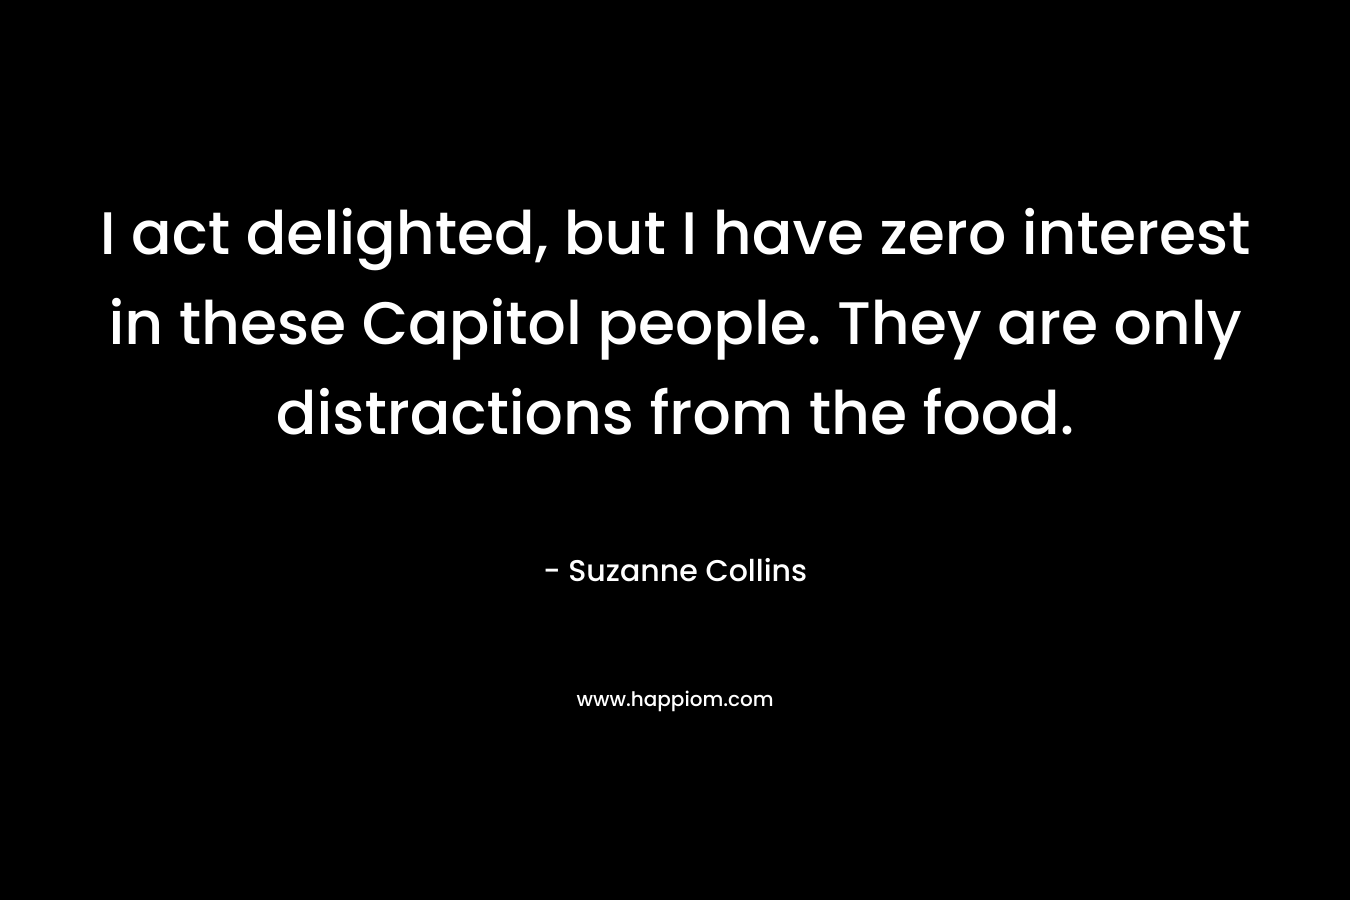 I act delighted, but I have zero interest in these Capitol people. They are only distractions from the food. – Suzanne Collins